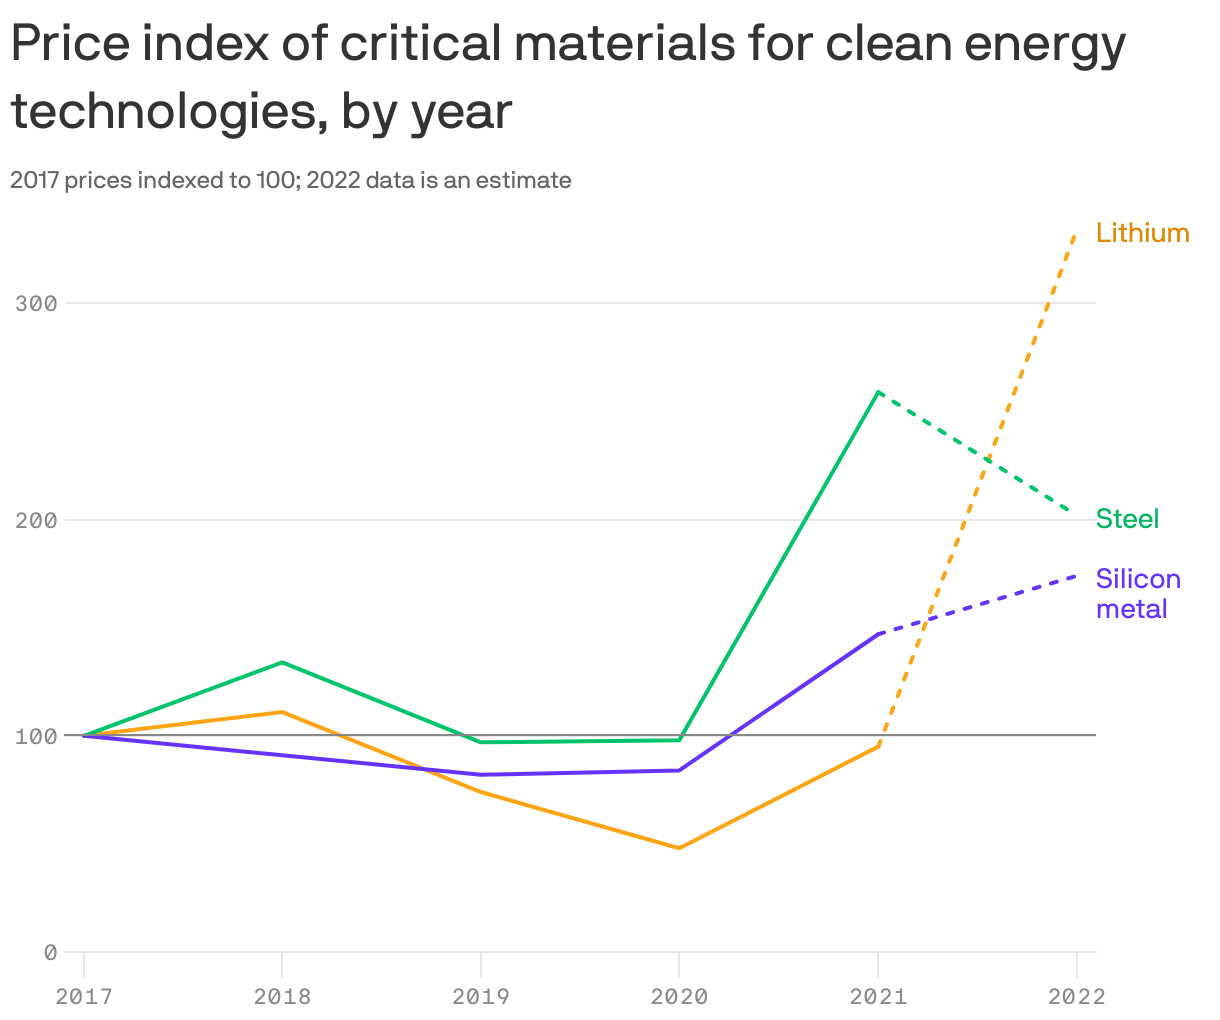 Price index of critical materials for clean energy technologies, by year